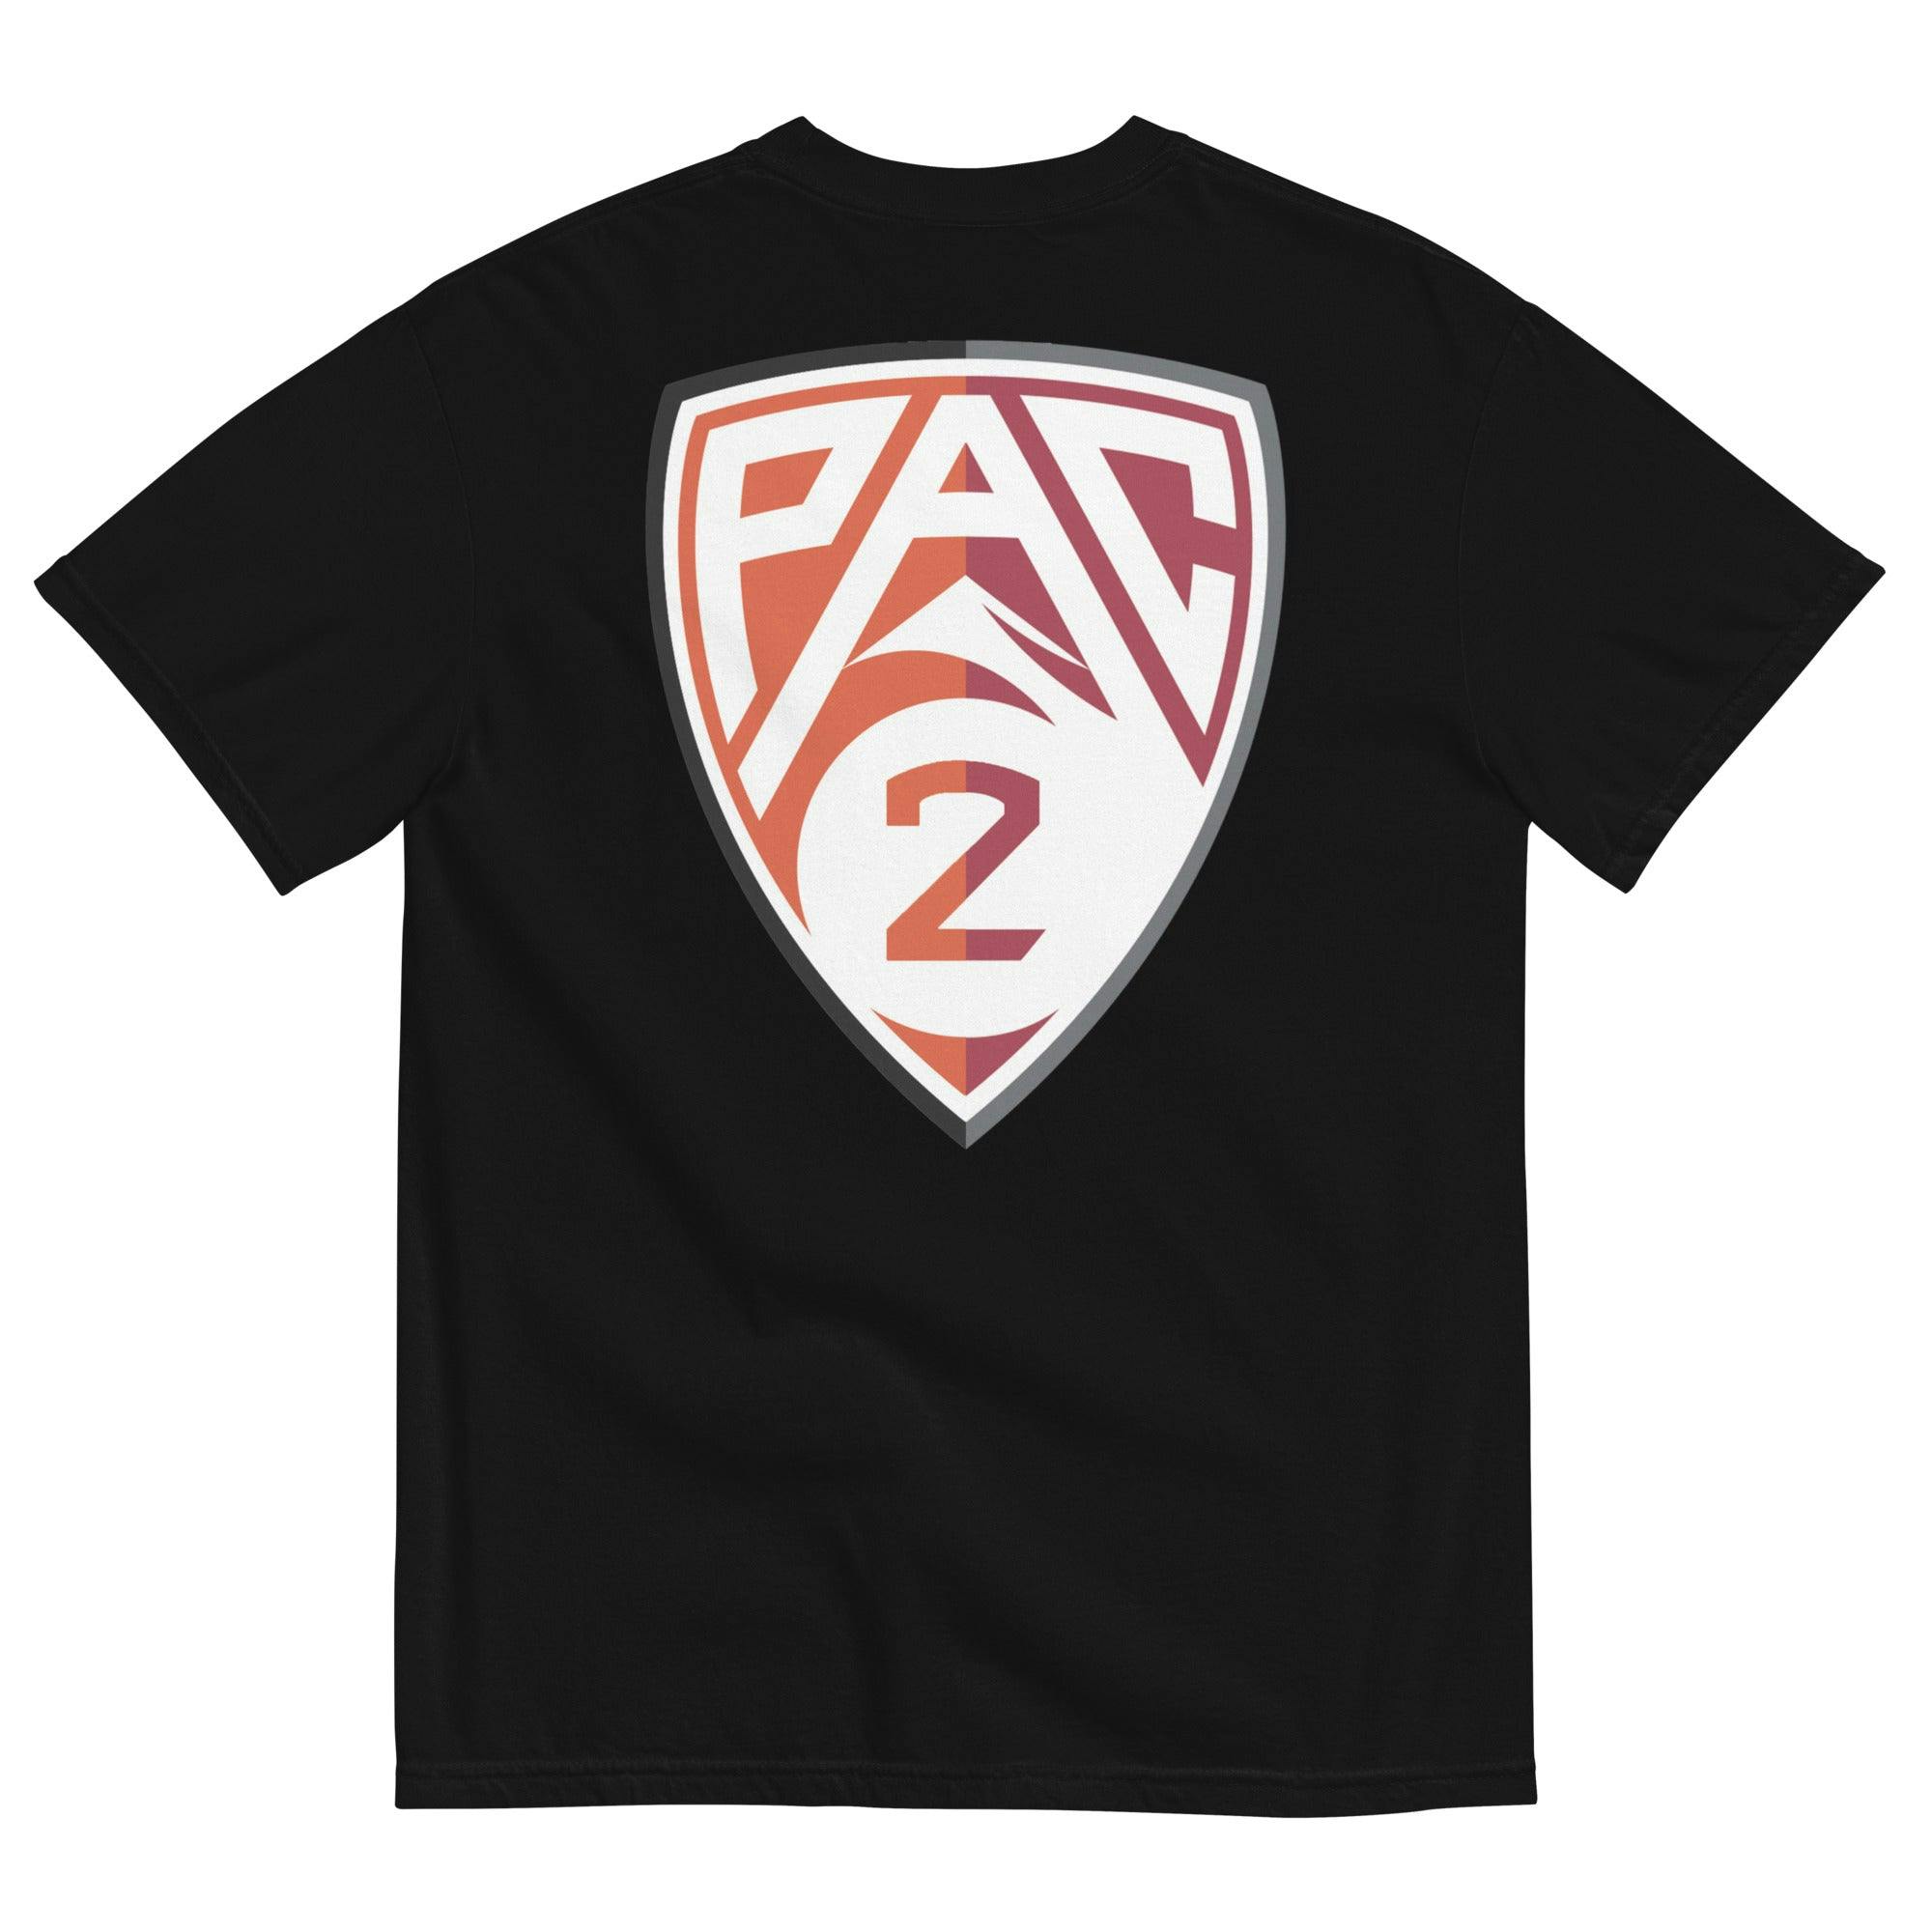 The Pac 2 T-Shirt - Unity